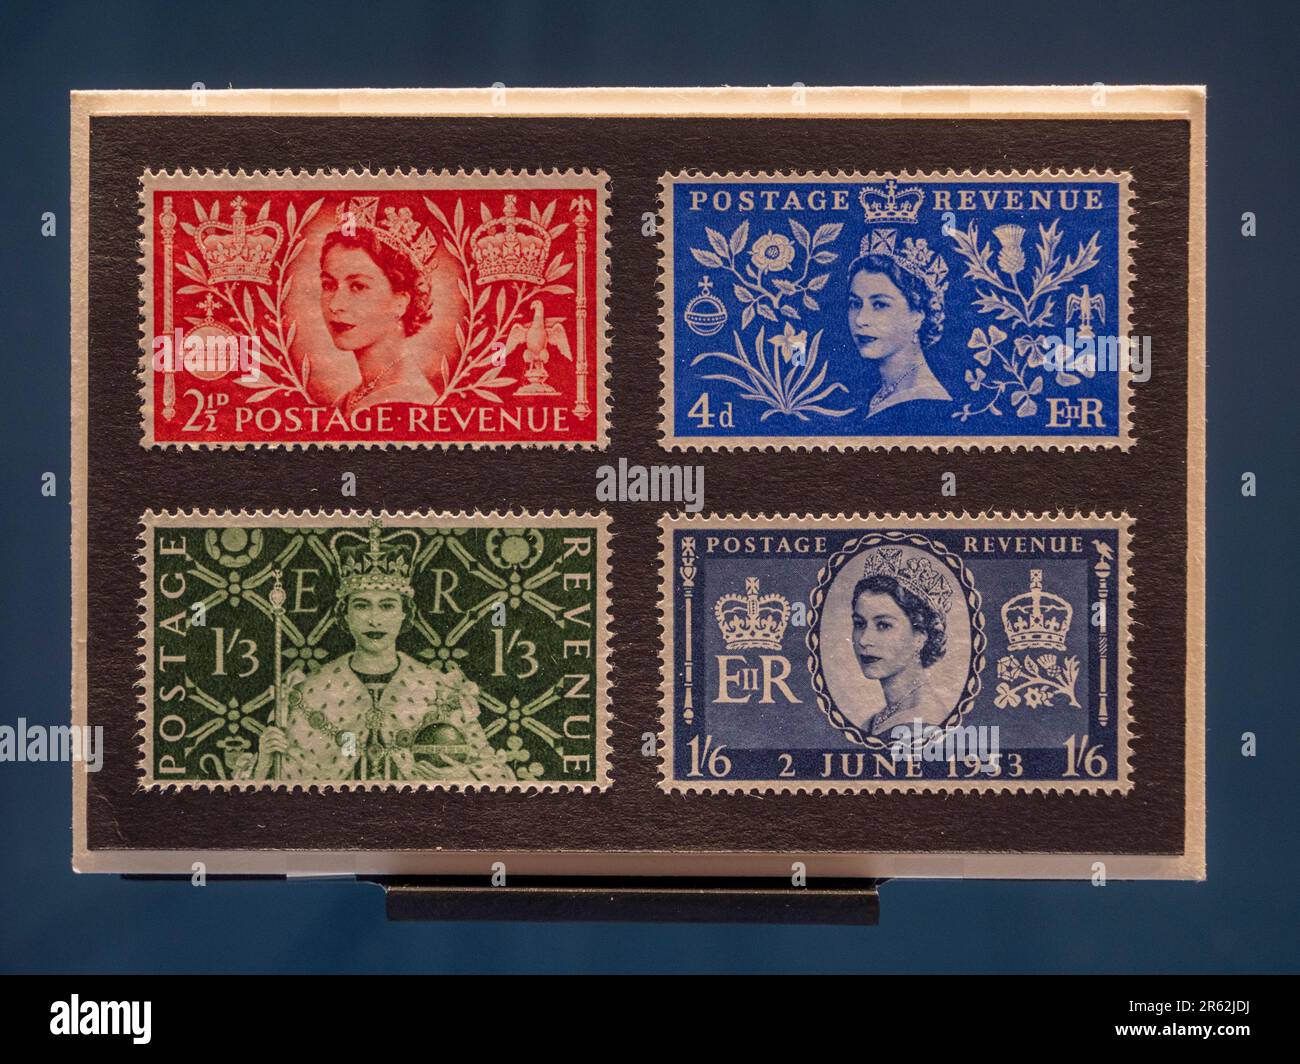 Coronation stamps for Queen Elizabeth II on display in the Postal Museum in London, UK. Stock Photo